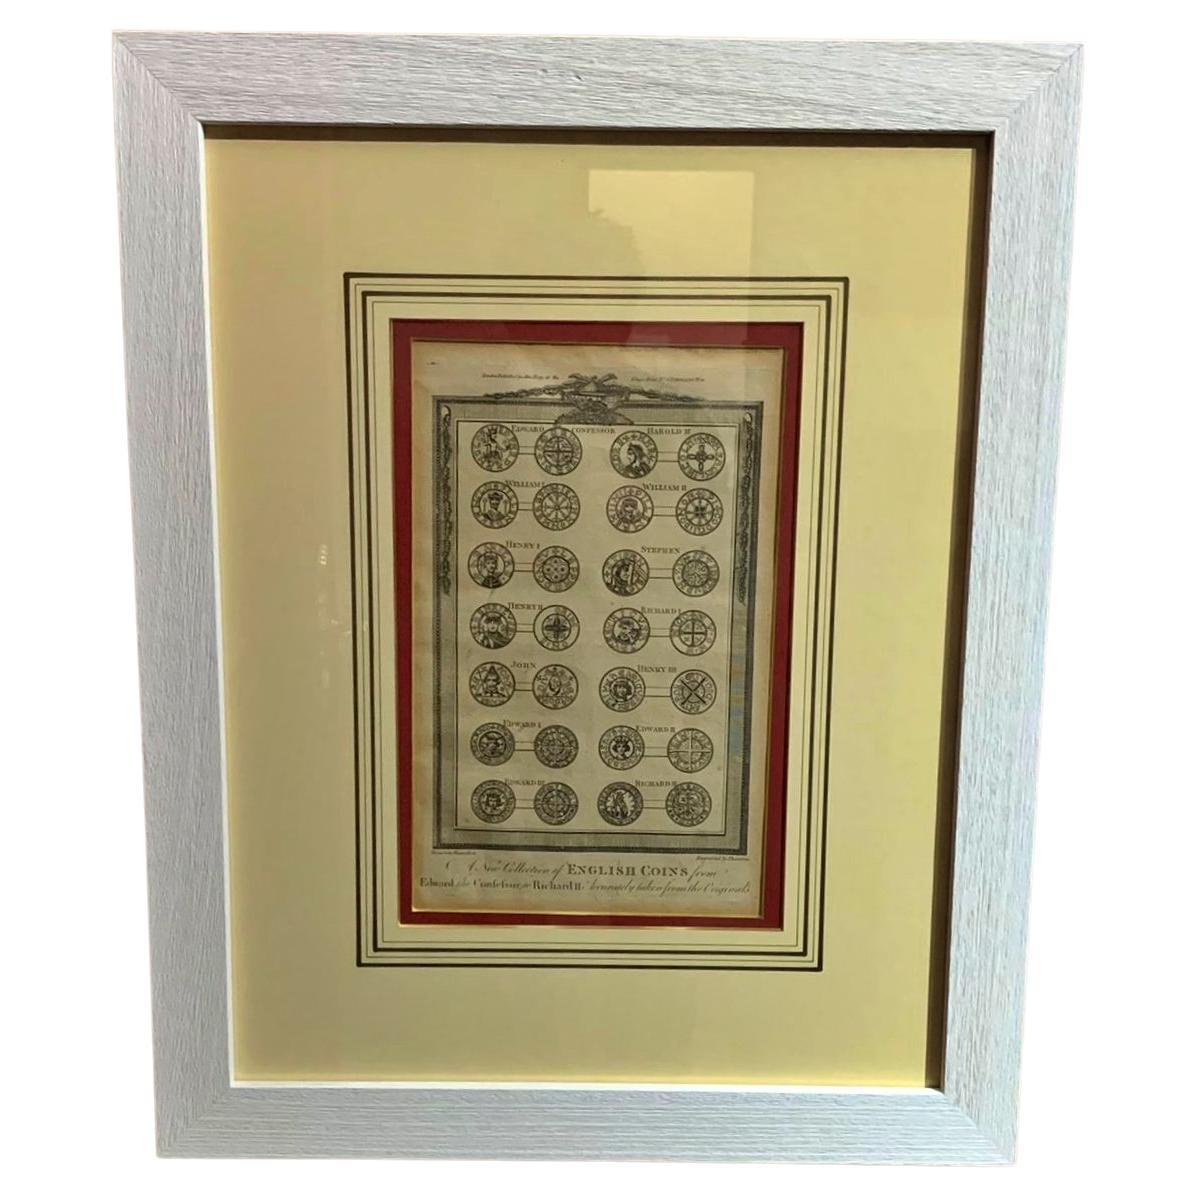 English Framed Print 19th Century "A New Collections of English Coins" For Sale